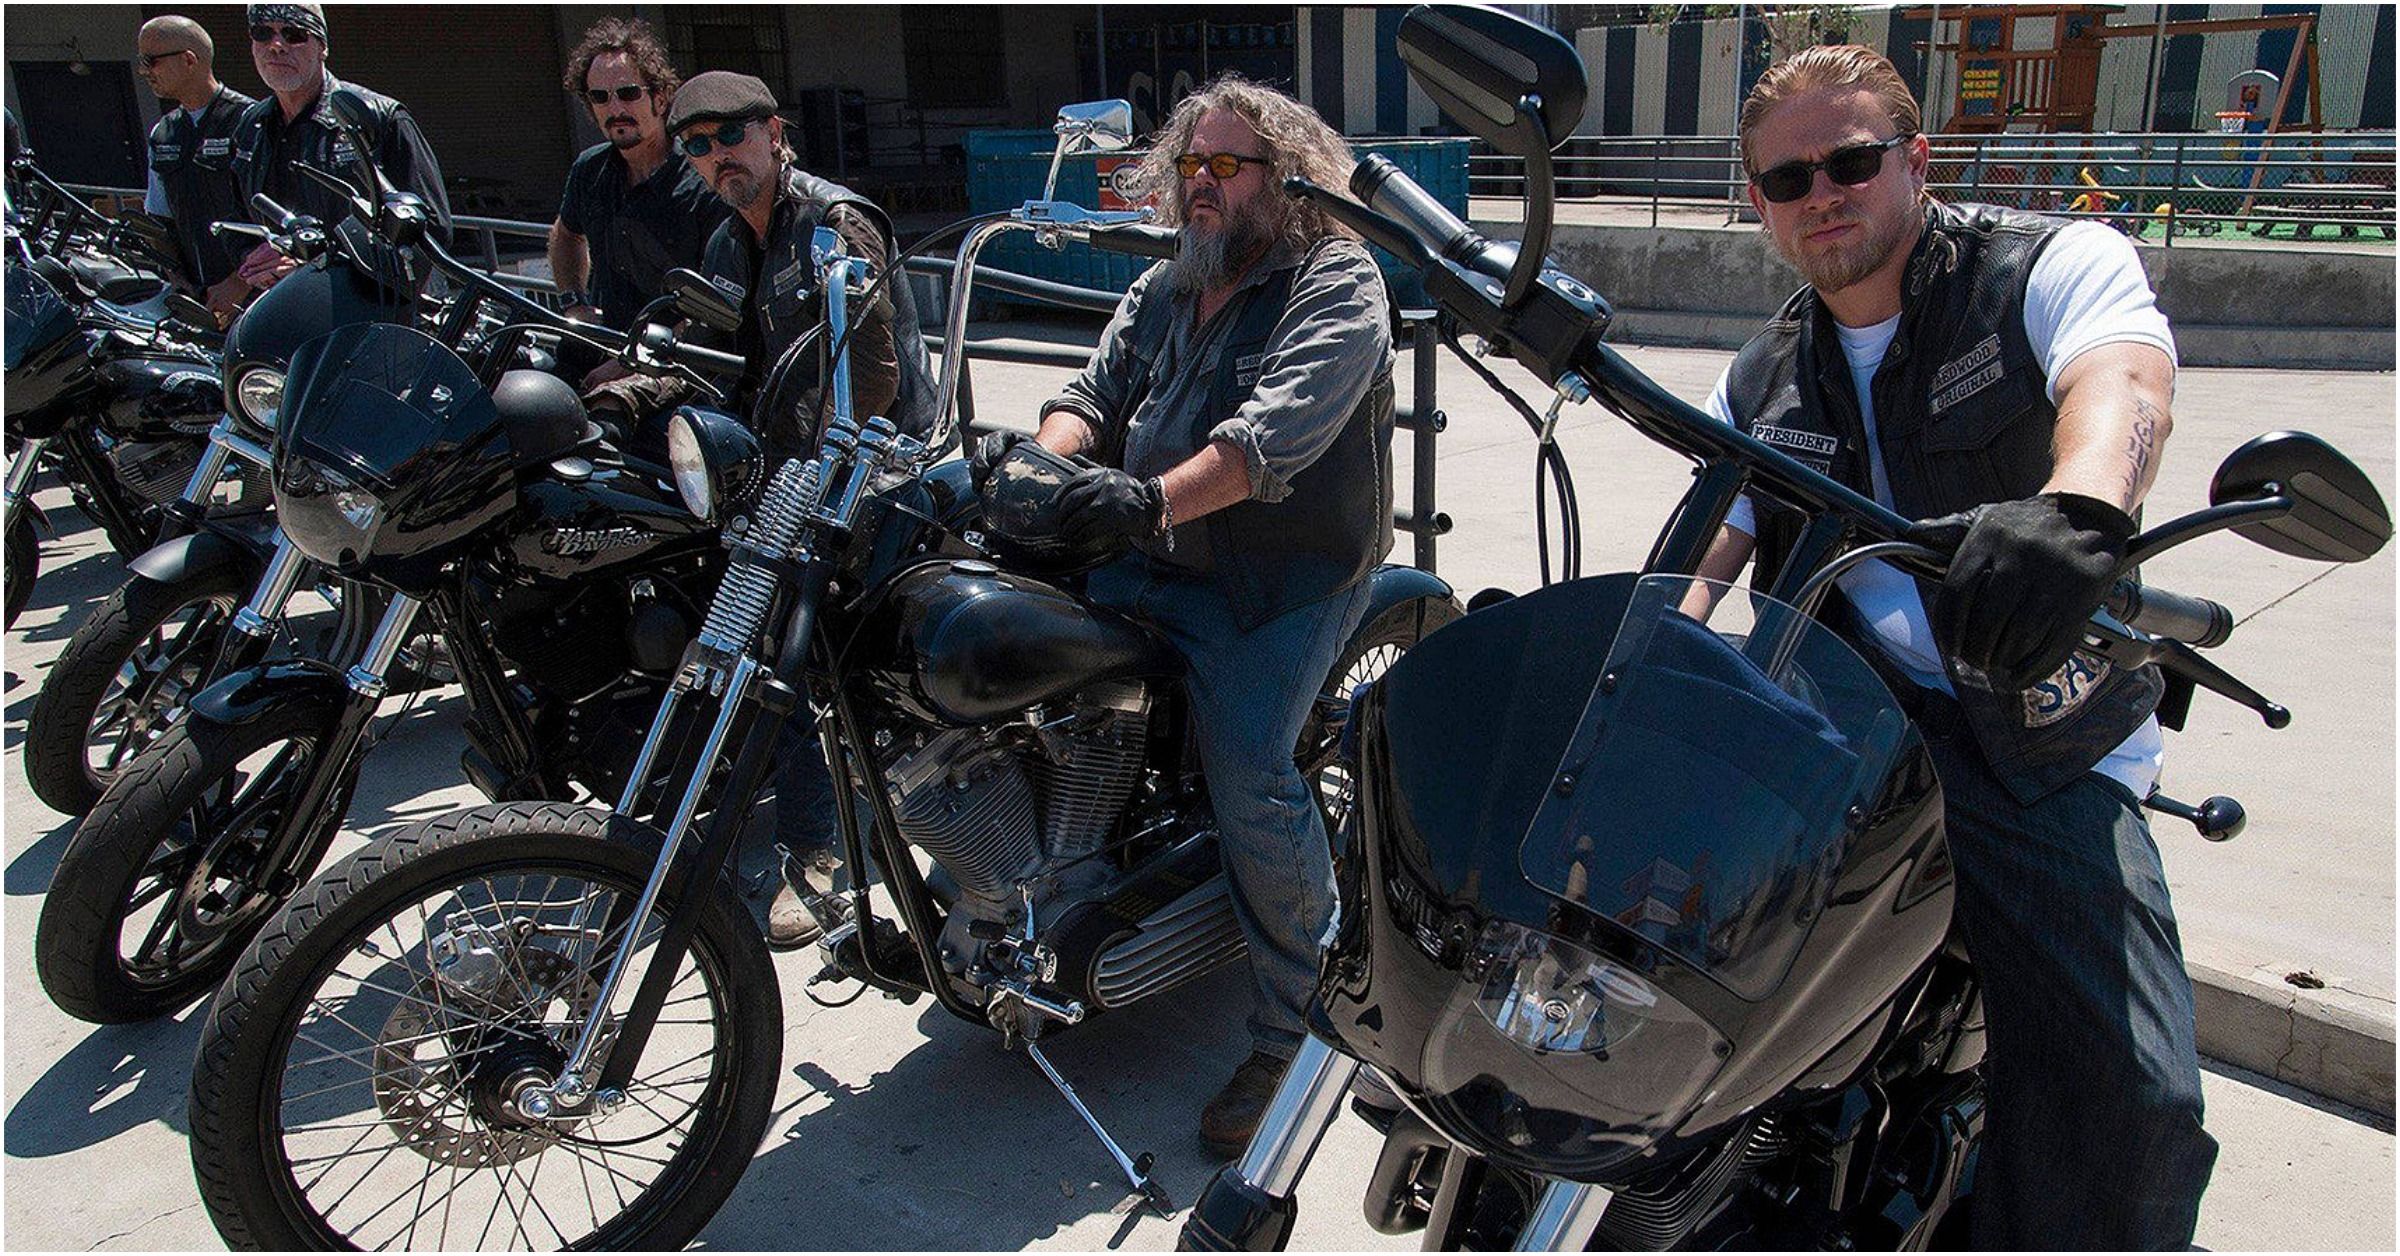 sons of anarchy mega